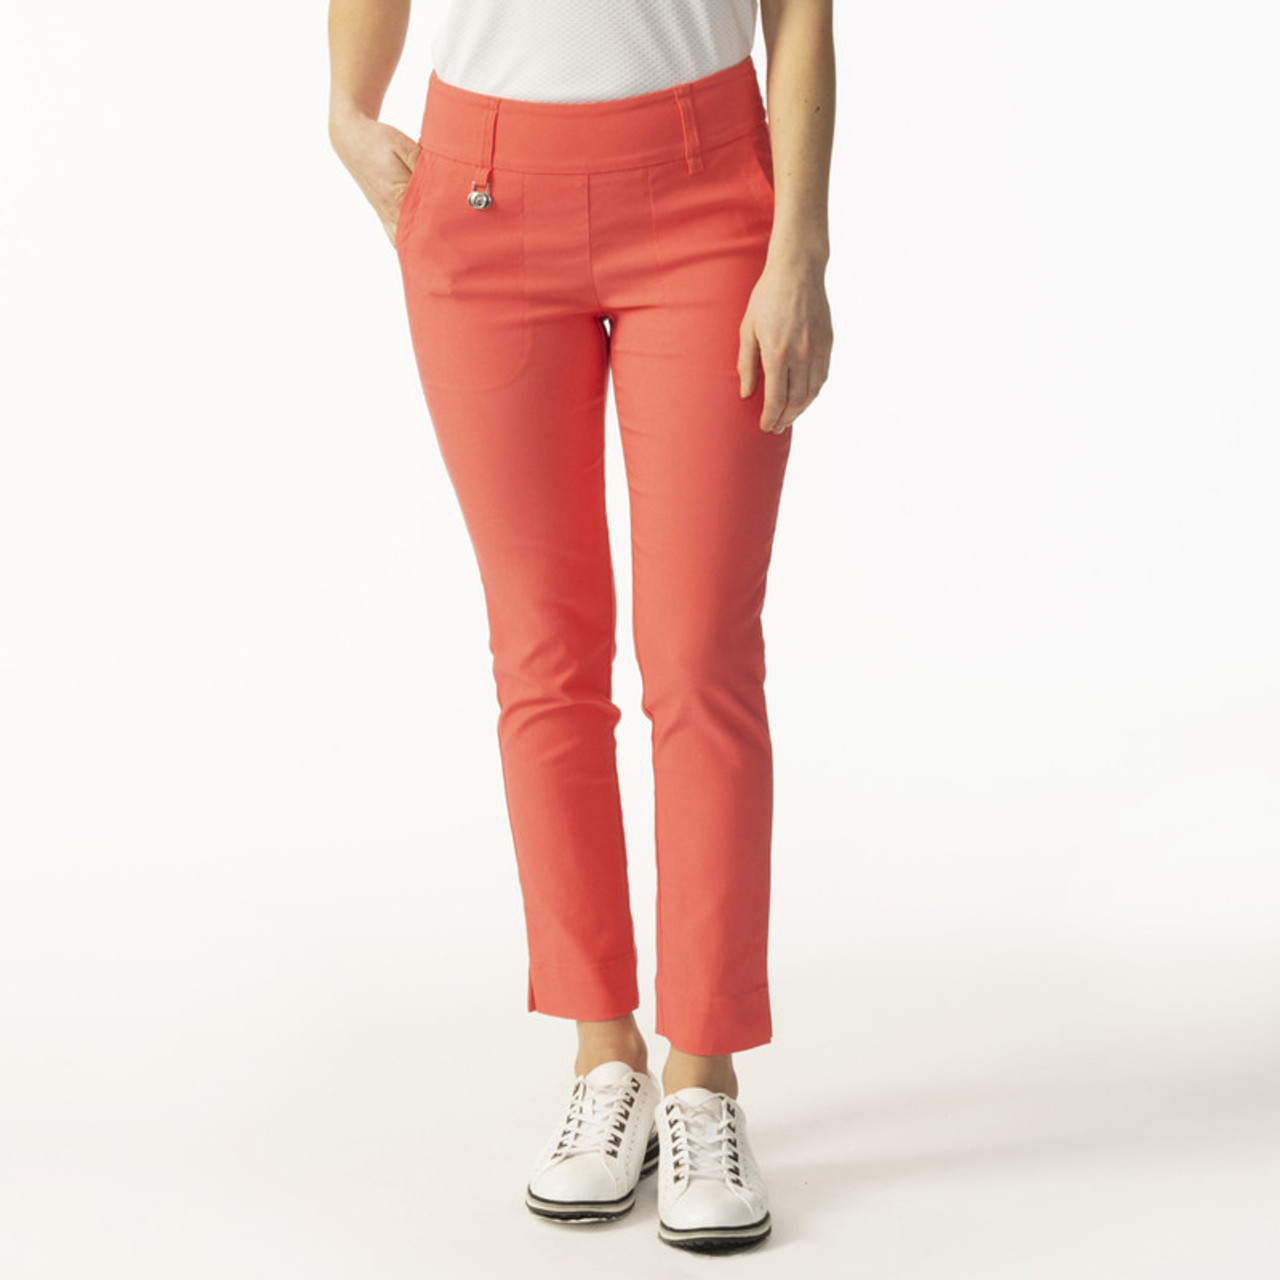 Daily Sports Magic Woman's High Water Pants - Coral - Fore Ladies